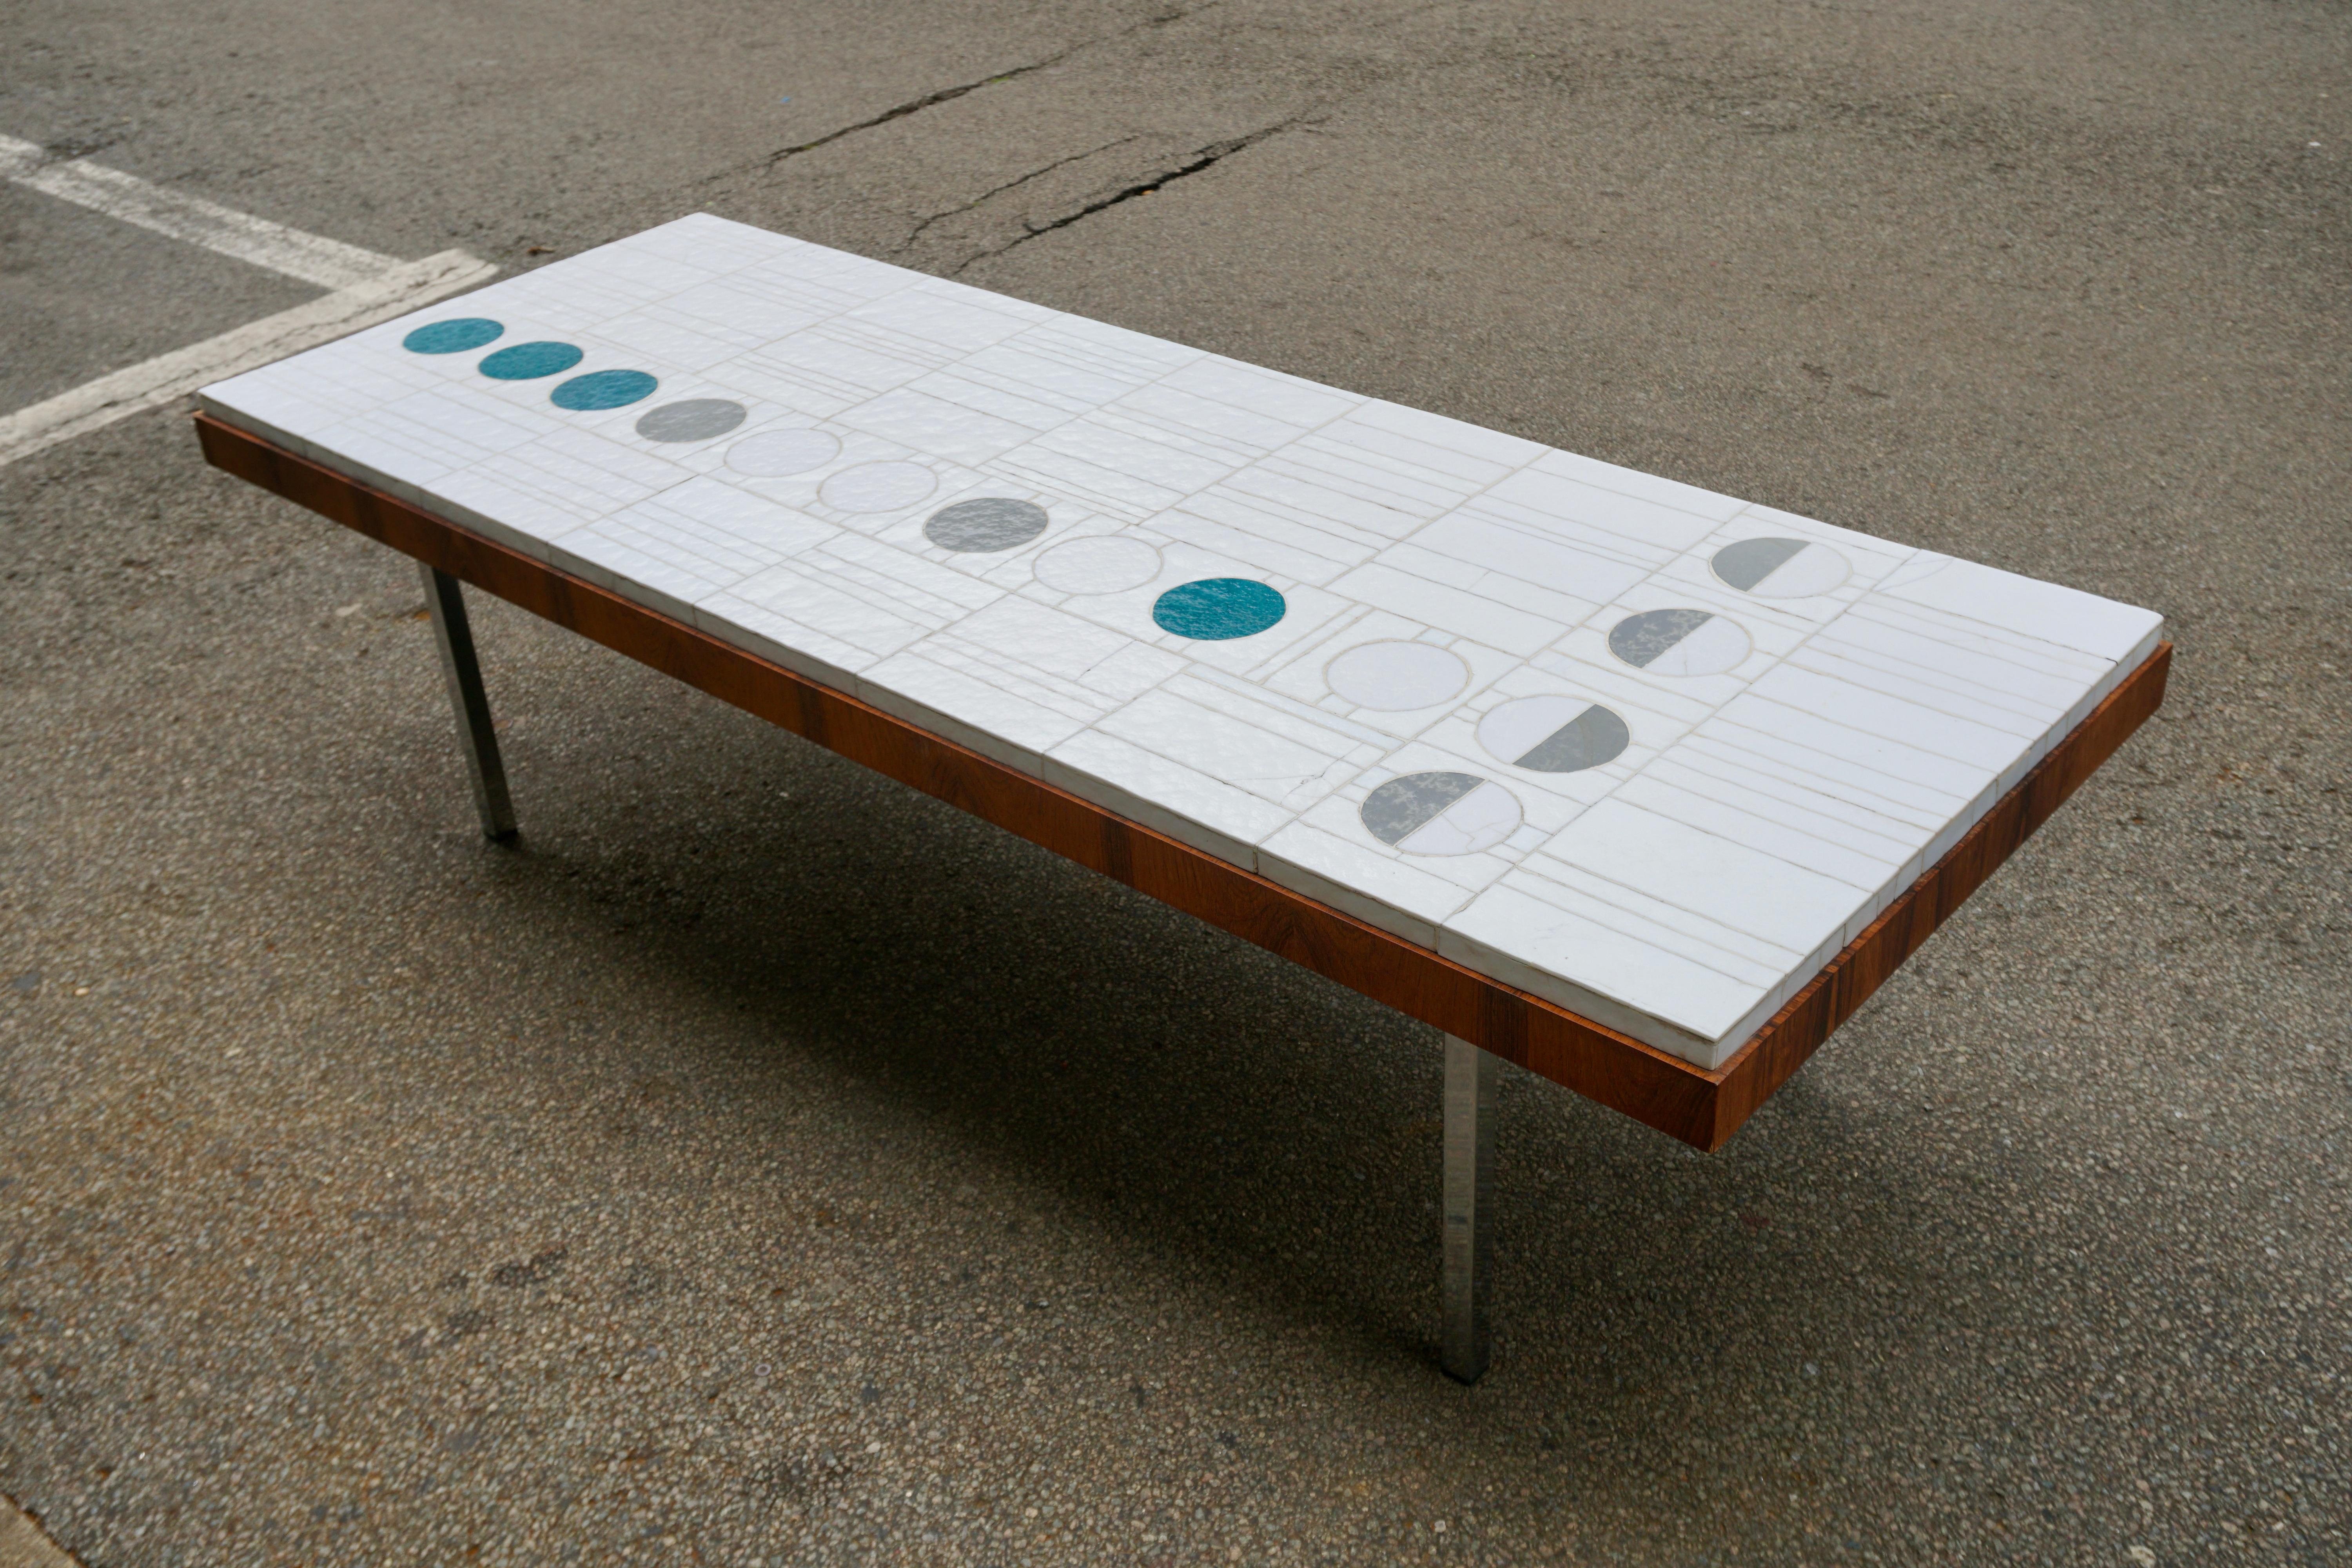 Rectangular white abstract ceramic coffee table on four chrome legs.
This table is not signed but made in the style of Pia Manu.

Dimensions;
Width 161 cm.
depth 61 cm.
Height 45 cm.
Thickness of the table top 7 cm.
Weight 23 kg.